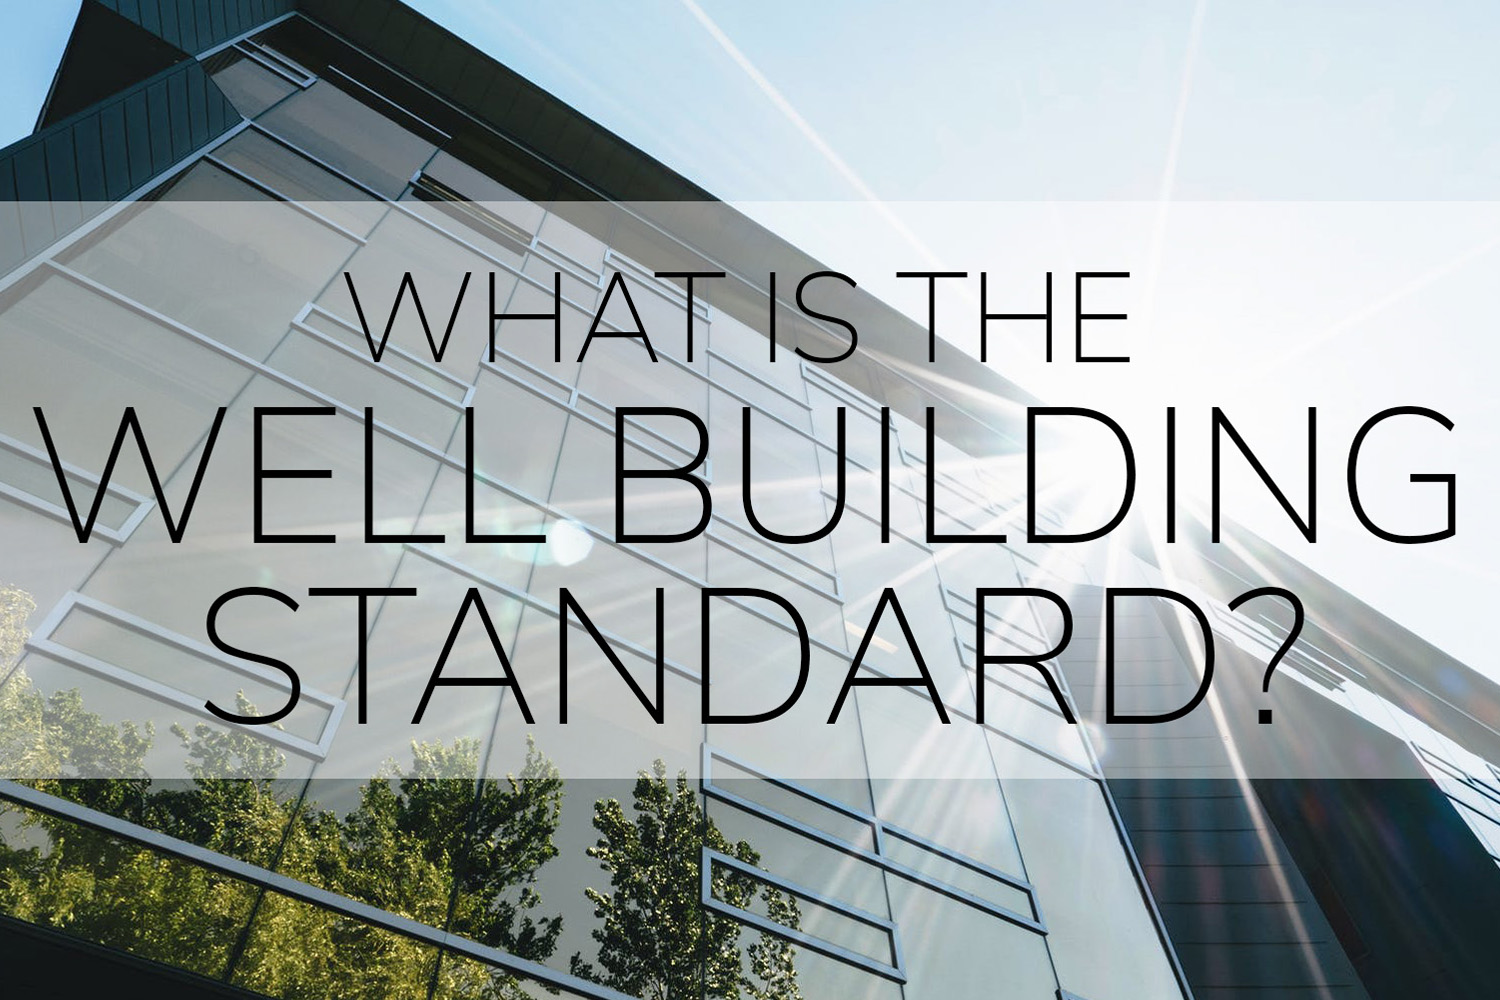 The Well Building Standard